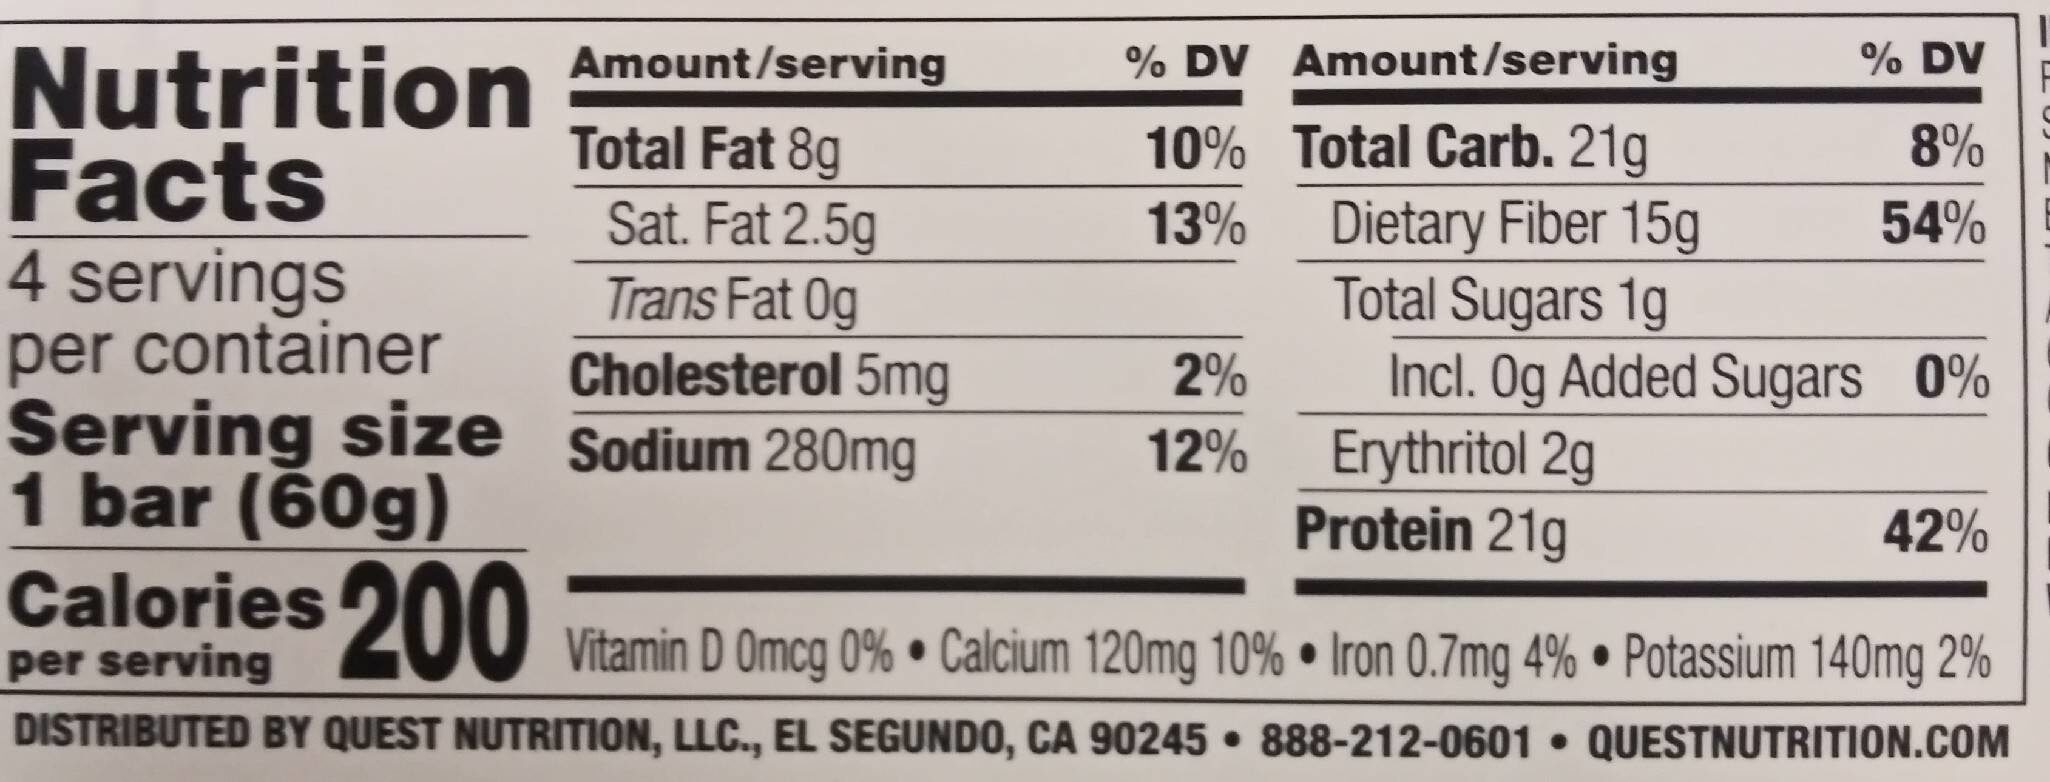 Cookies & cream protein bars - Nutrition facts